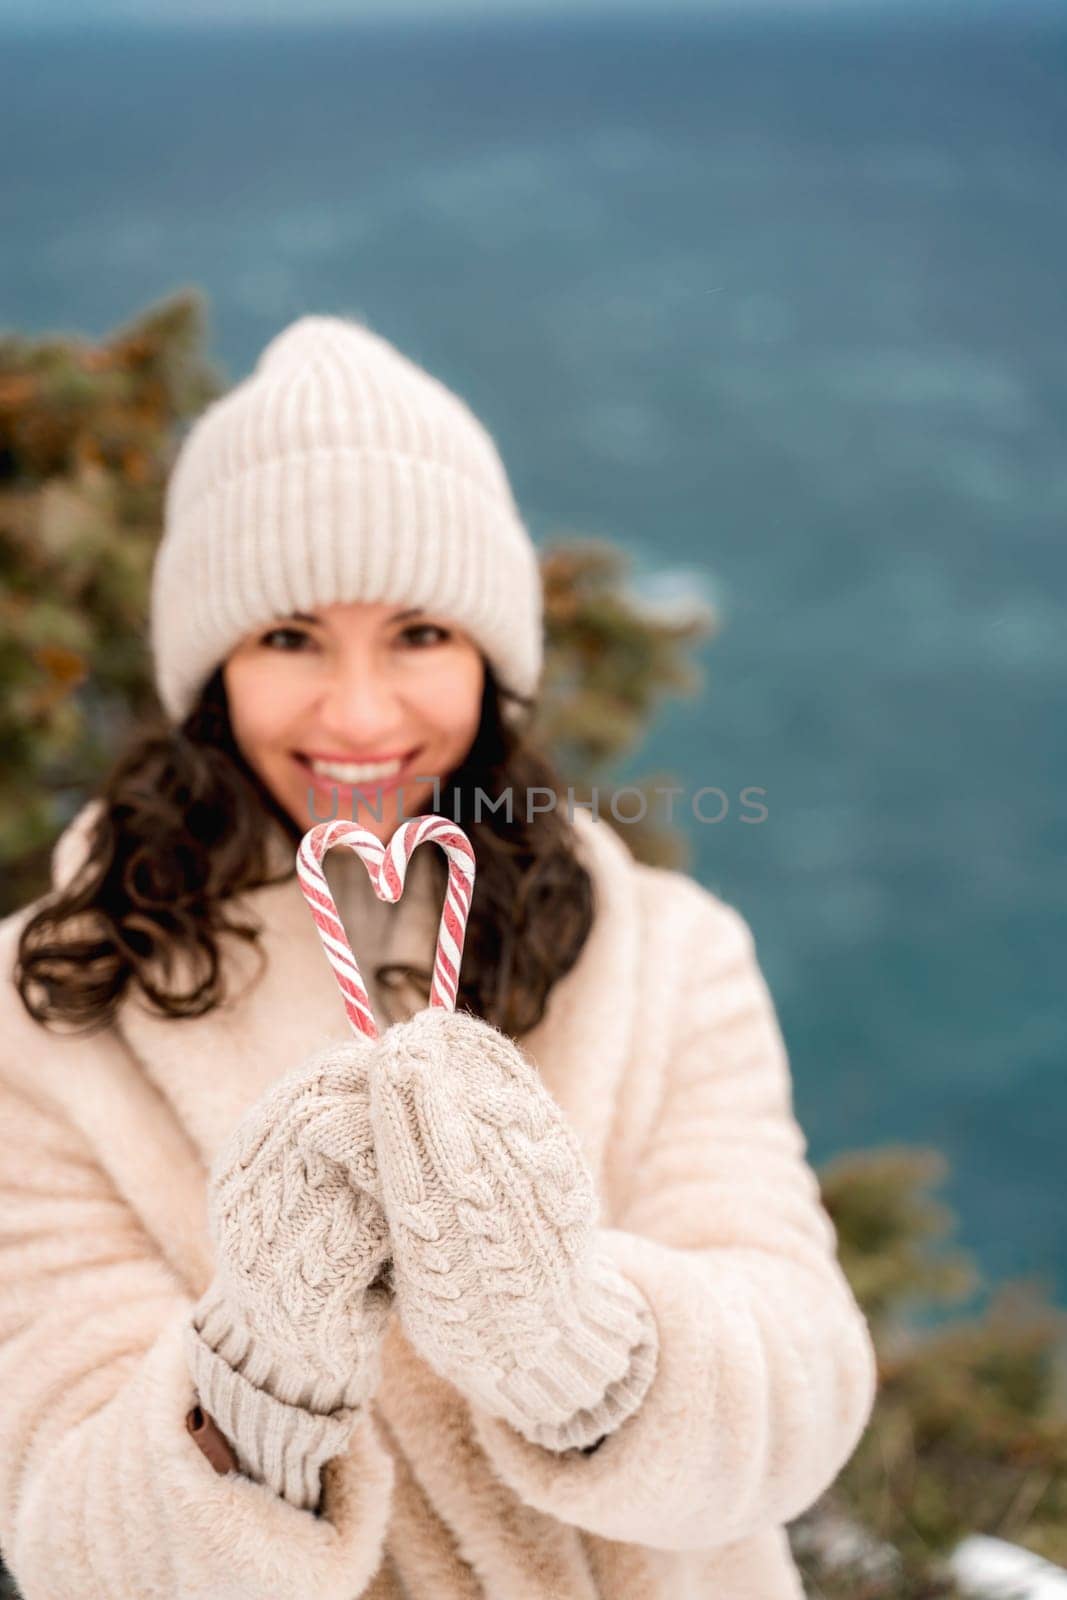 Woman candy sea. Smiling woman in knitted hat, mittens and beige coat holding lollipops candy canes in her hands in shape of heart against the backdrop of the sea